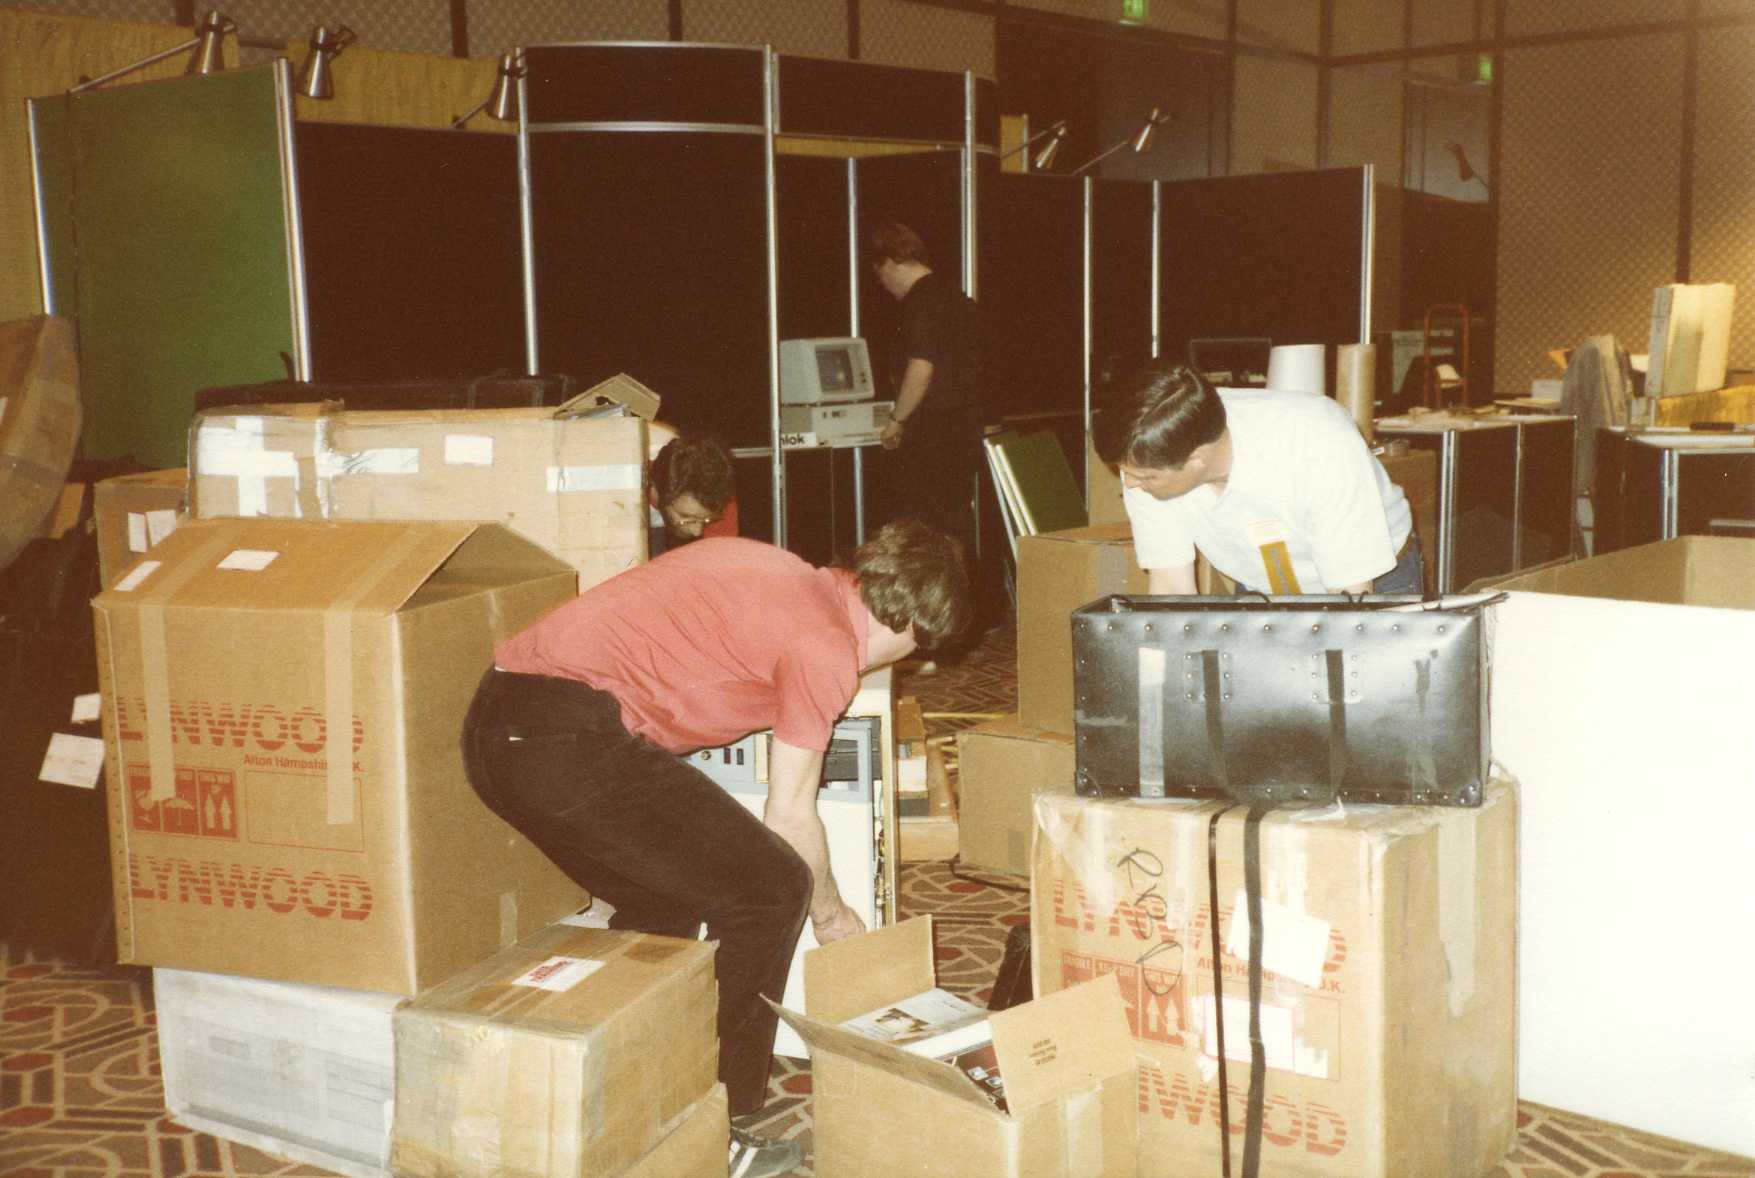 Unpacking at a conference